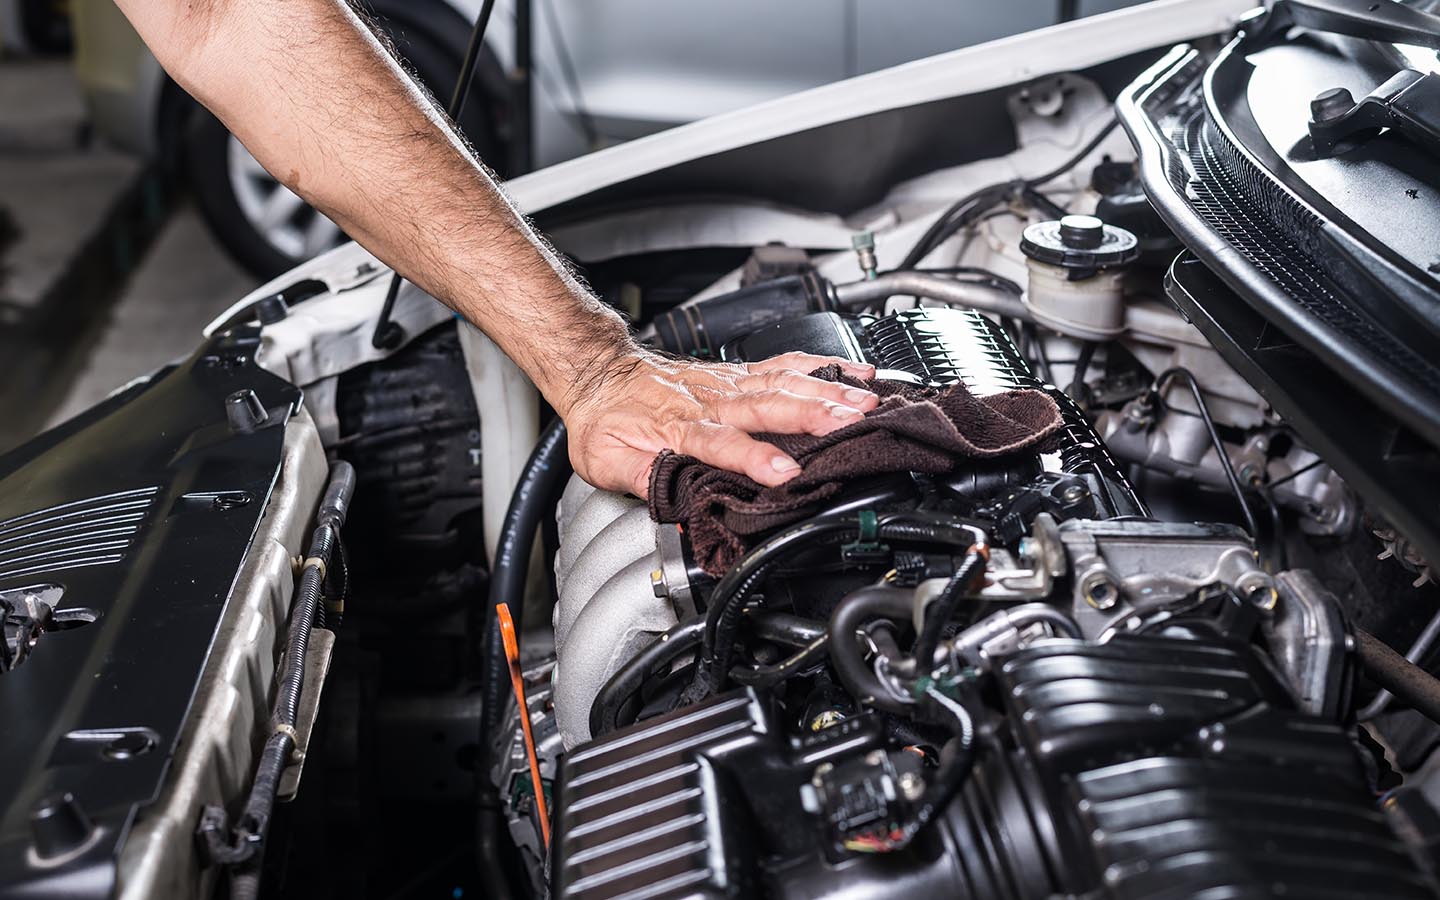 a clean and maintained engines enhances vehicle performance